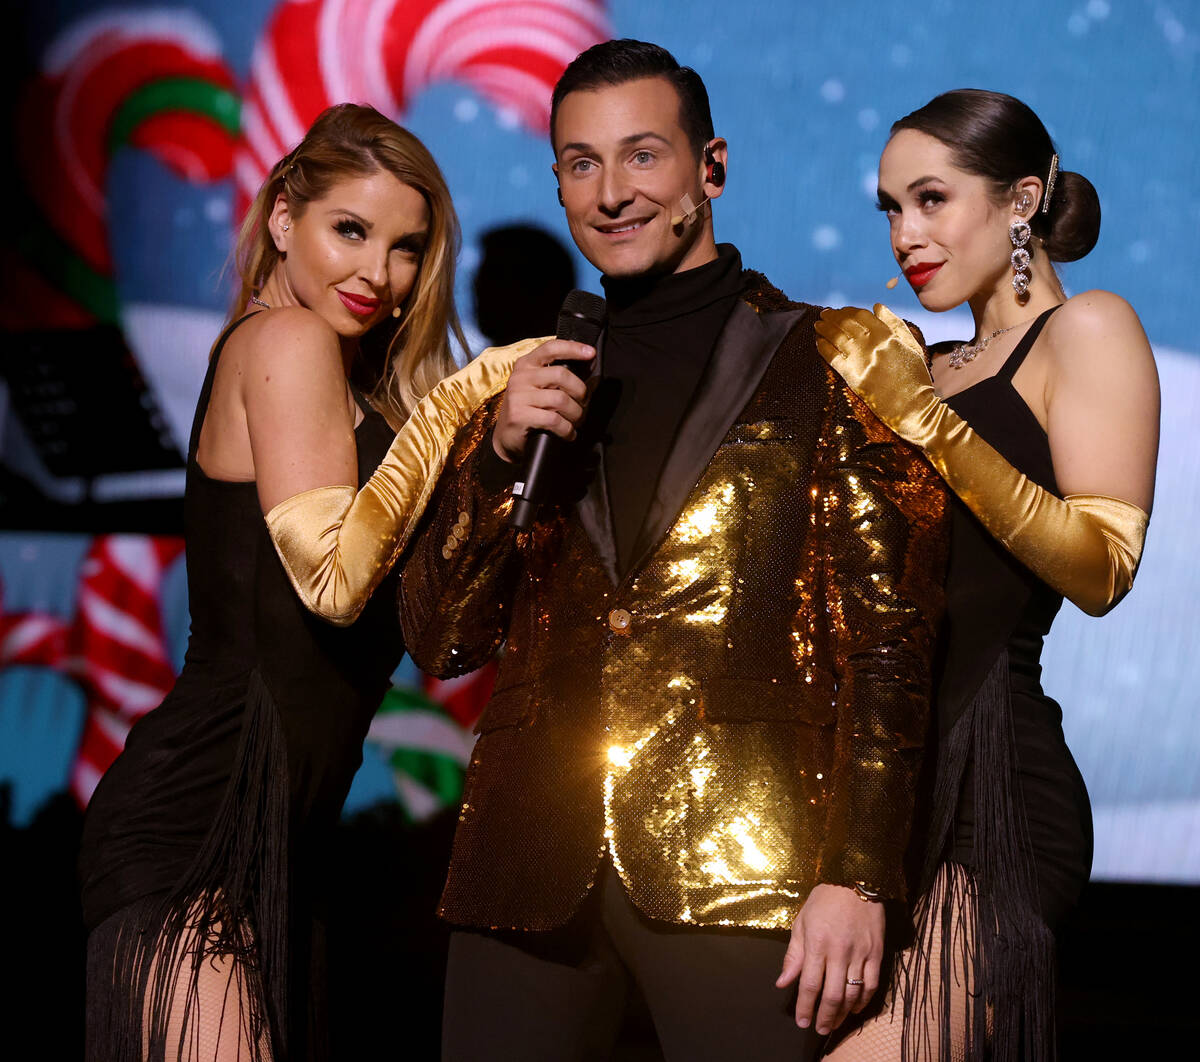 Lou Gazzarra sings "Santa's Back in Town" with Sarah LeClear, left, and Jaclyn McSpad ...